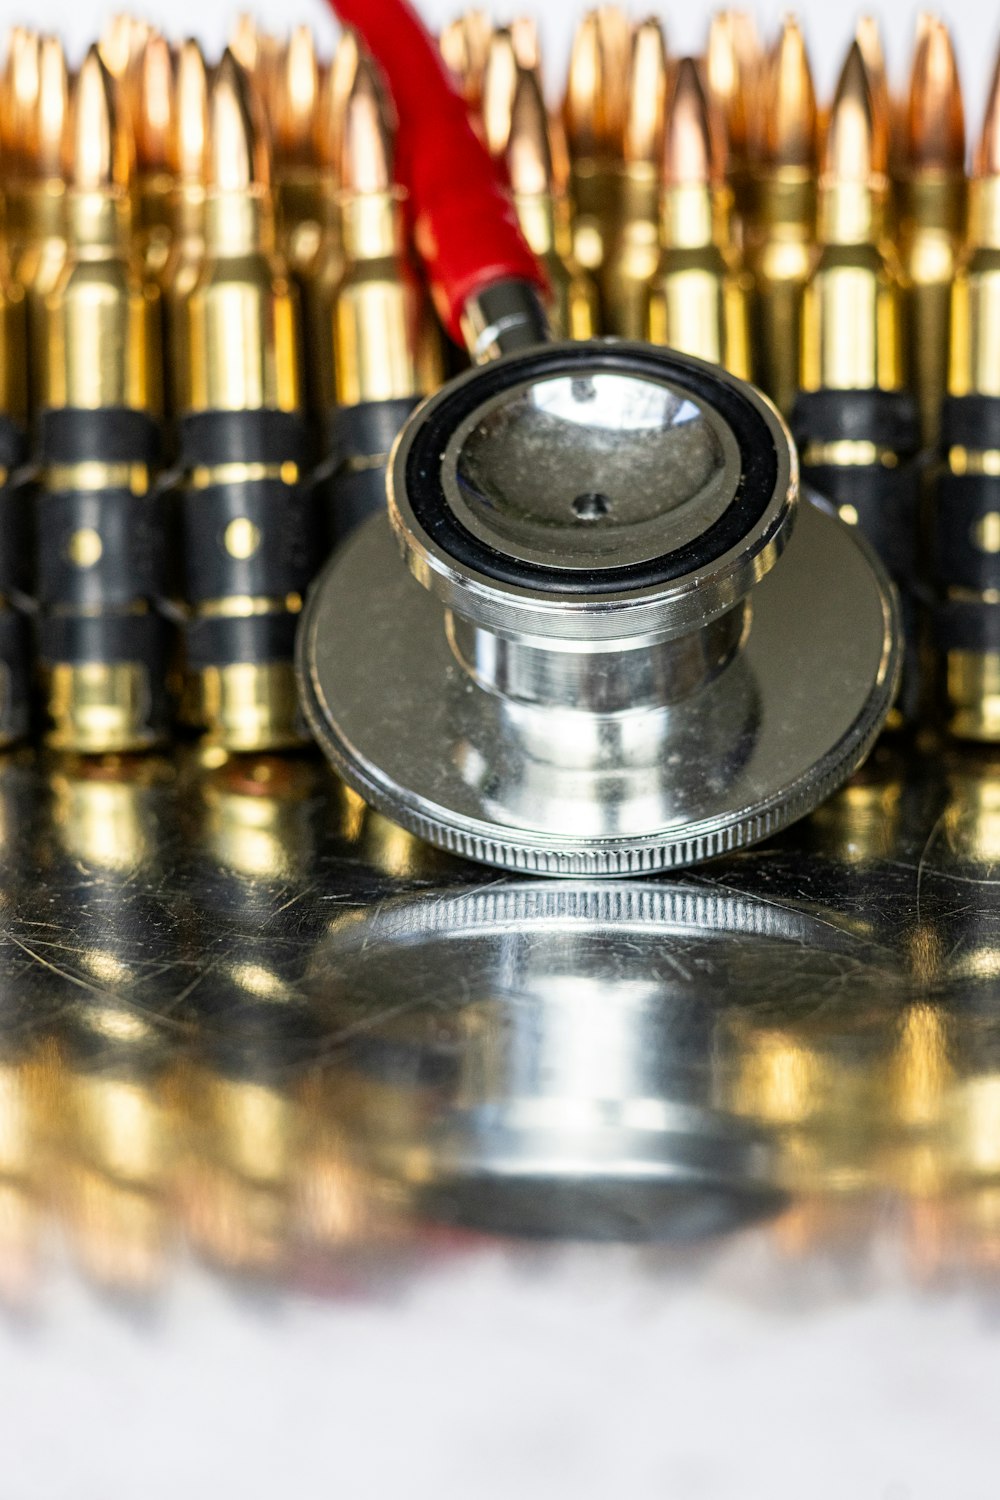 a stethoscope sitting on top of a pile of bullet casings